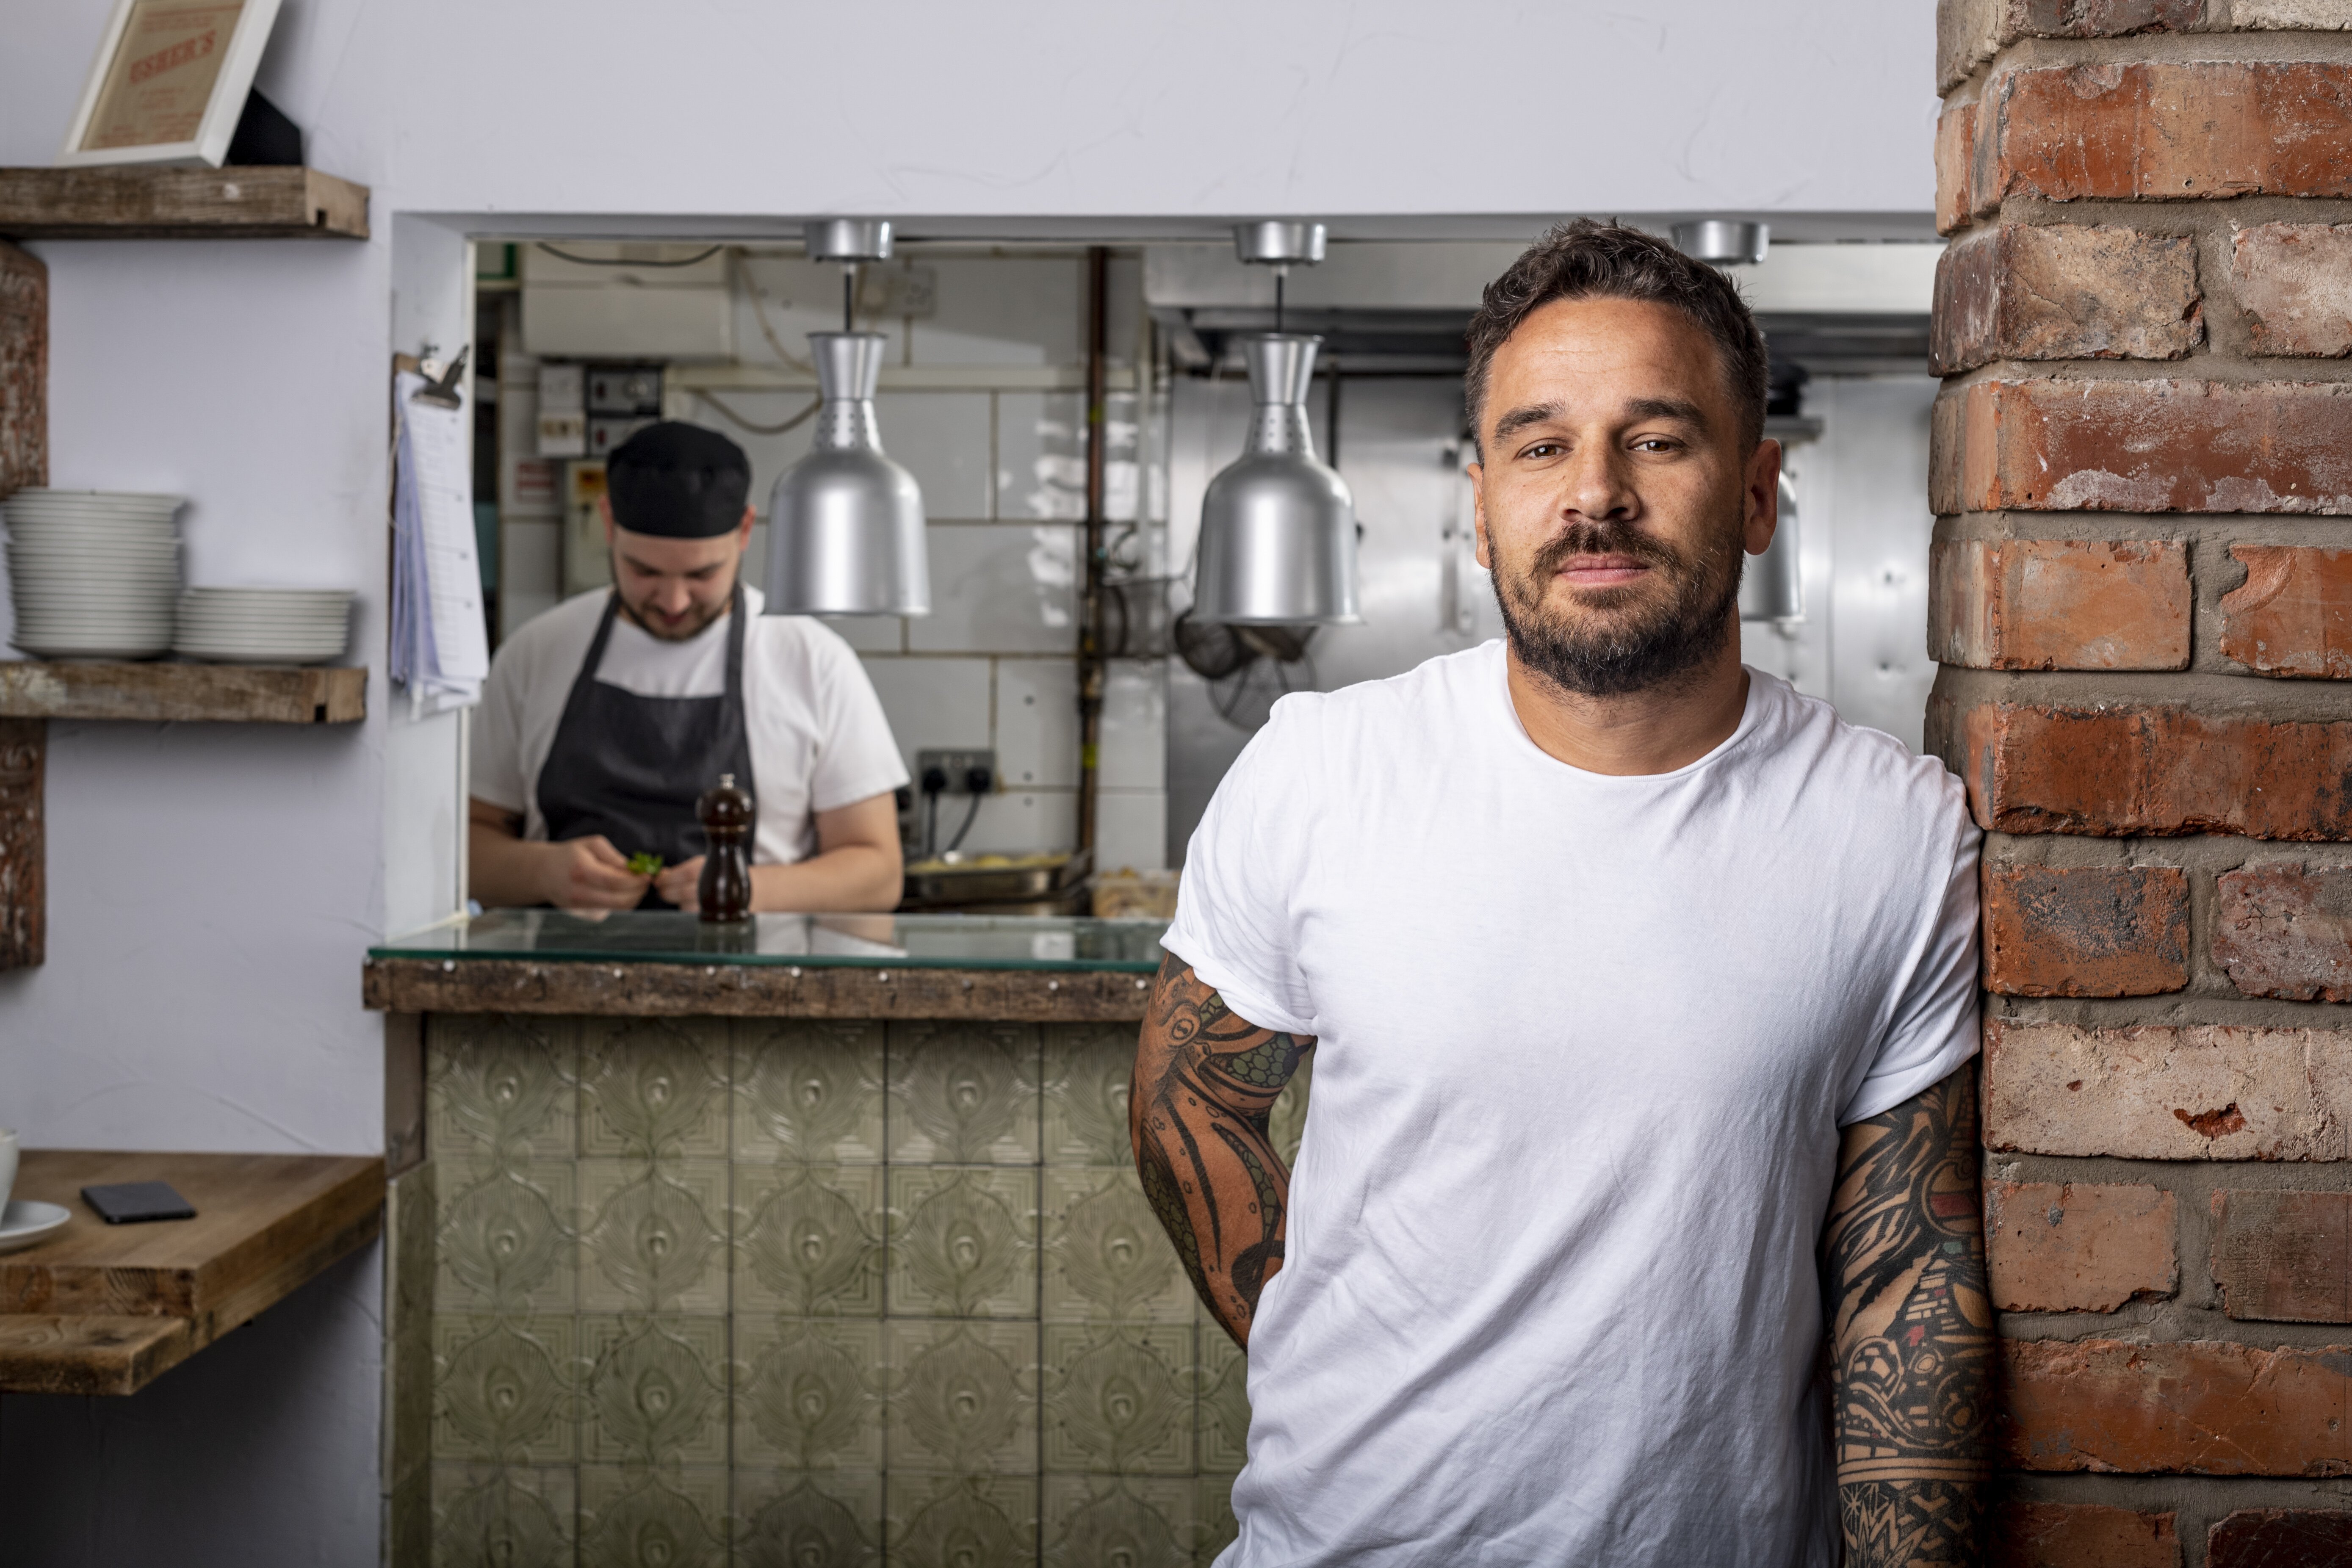 ‘If I hadn’t done it, I would have felt regret’: Gary Usher cancels Seedrs crowdfund